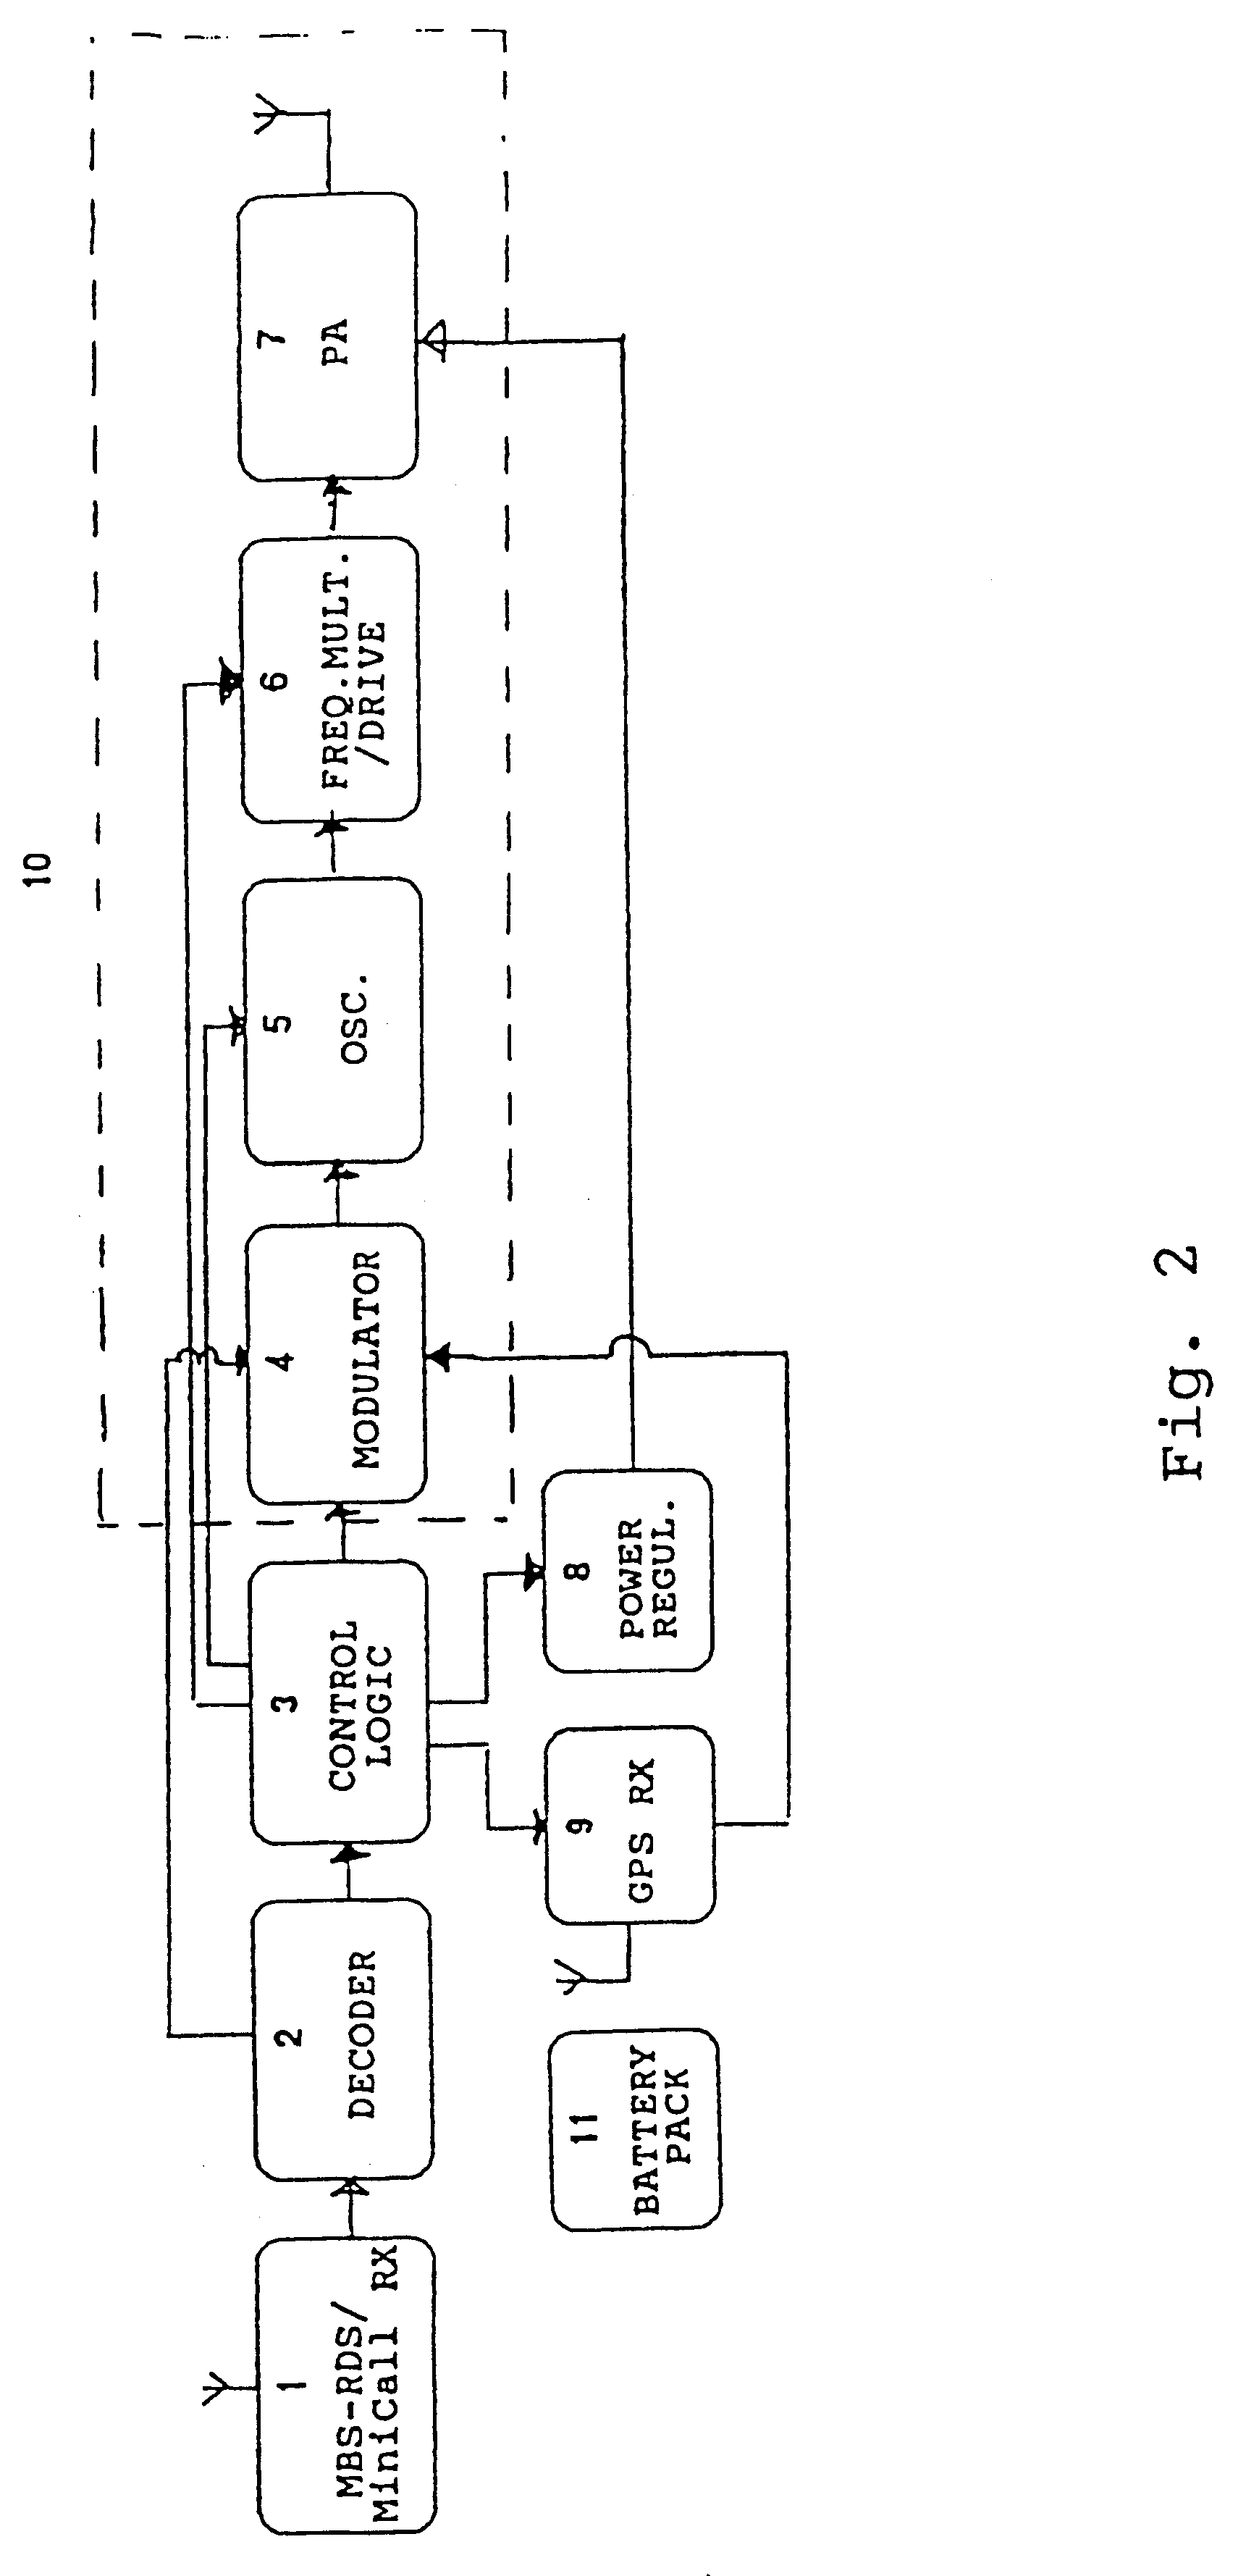 Transponder system for localization of an object